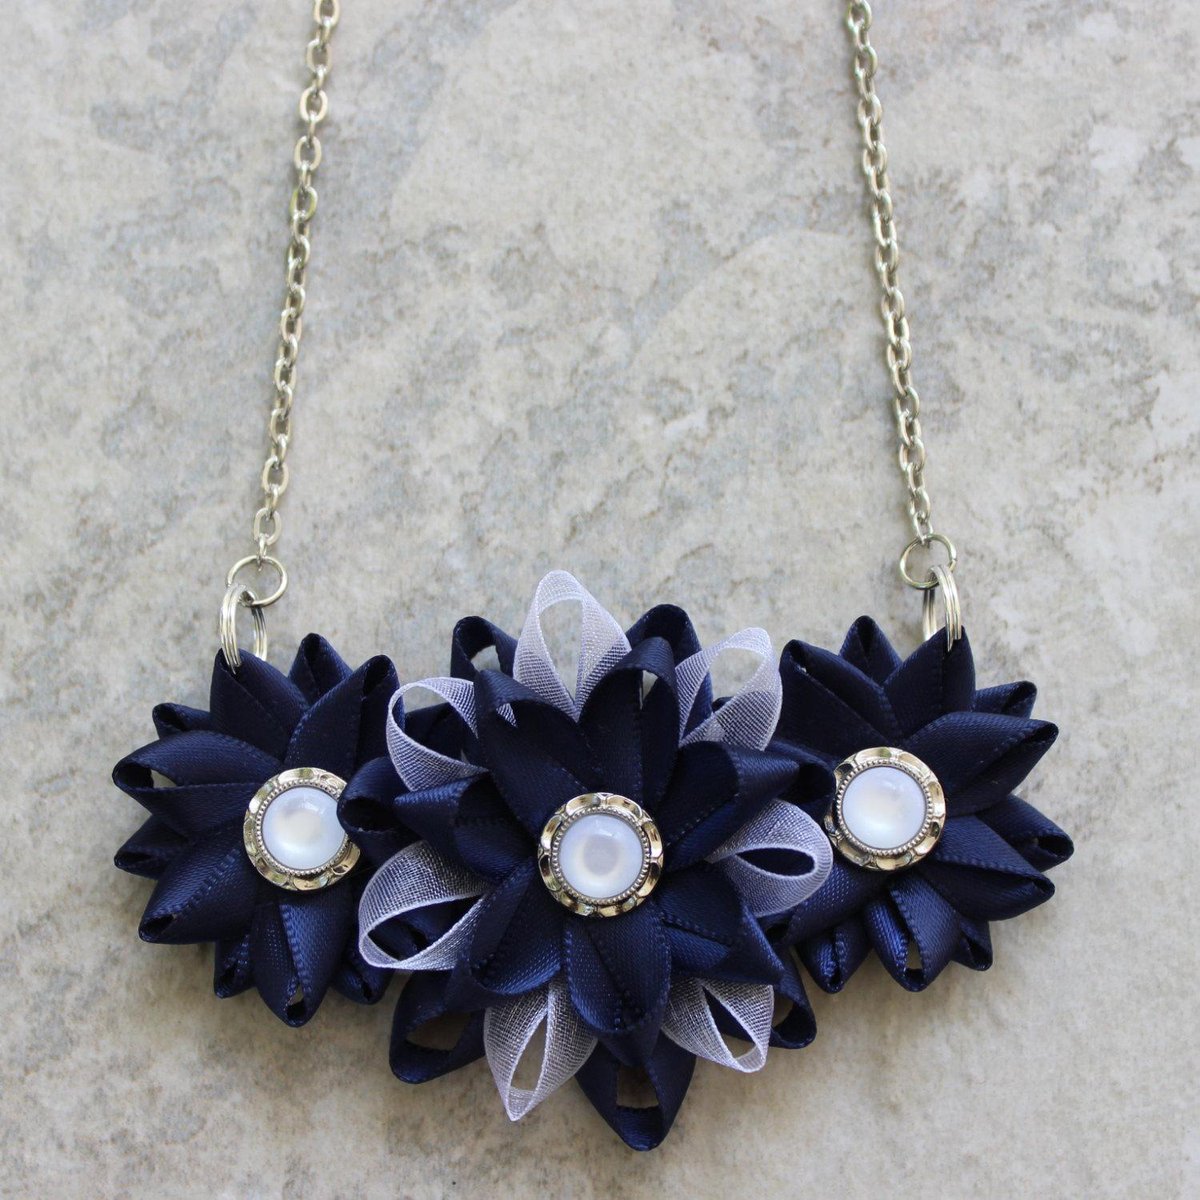 Navy Necklace, Navy Blue Necklace, Navy and White Necklace, Whit… etsy.com/listing/204809… #Jewelry #WhiteAndNavyBlue